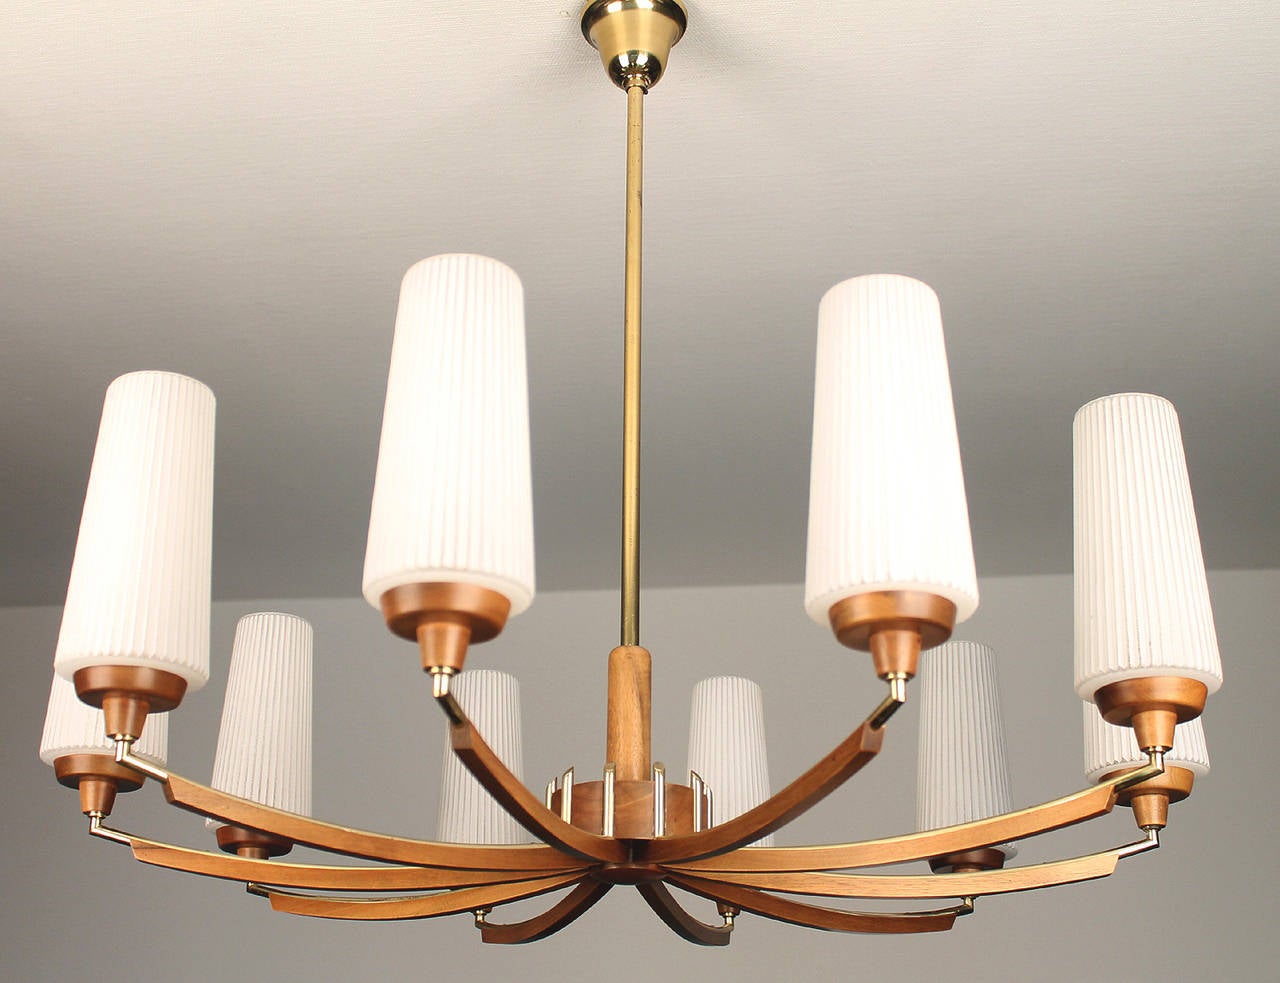 Large chandelier with wood and brass accents, fluted opaline glass shades.

Ten candelabra bulbs.

